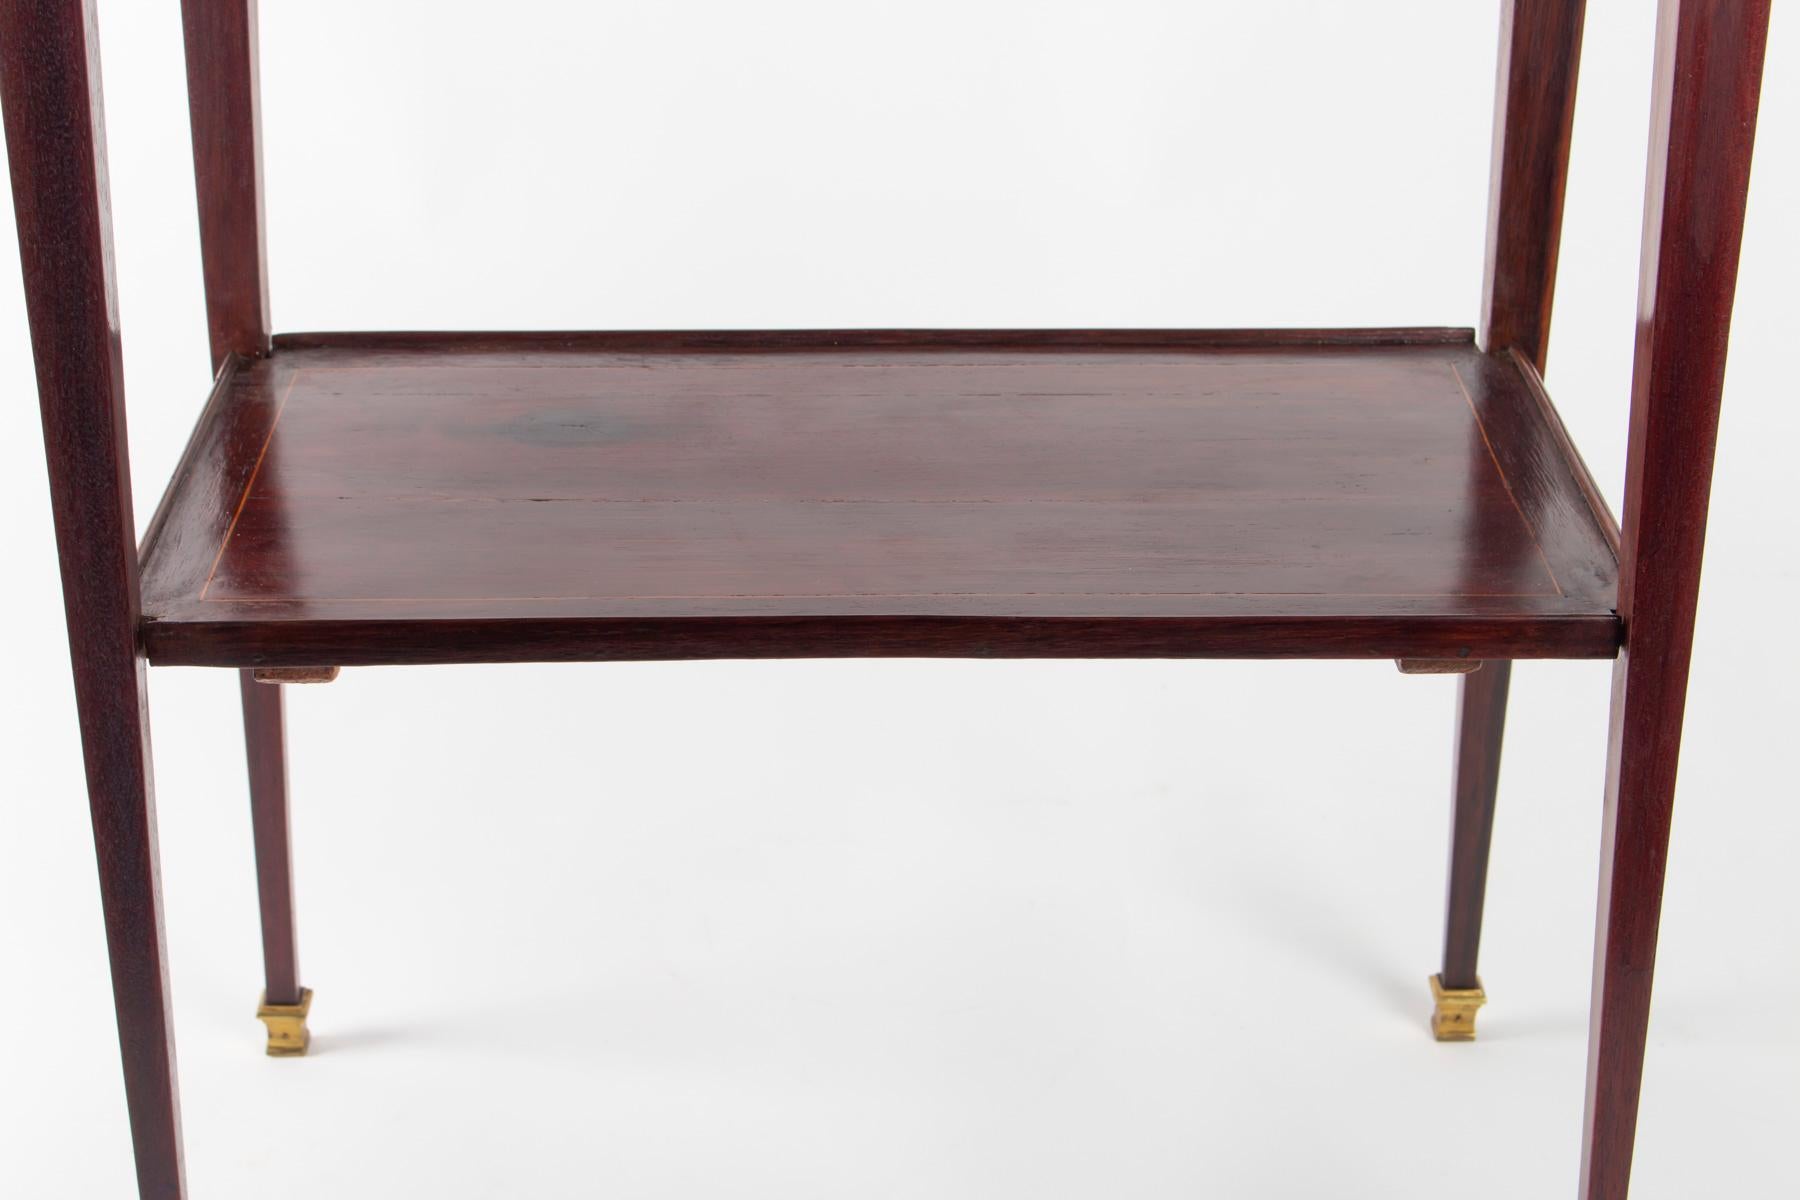 Small rectangular table, Louis XVI, rosewood and rosewood, boxwood nets, 1 drawer, gilt bronze
Measures: H 63cm, W 43cm, D 26cm.